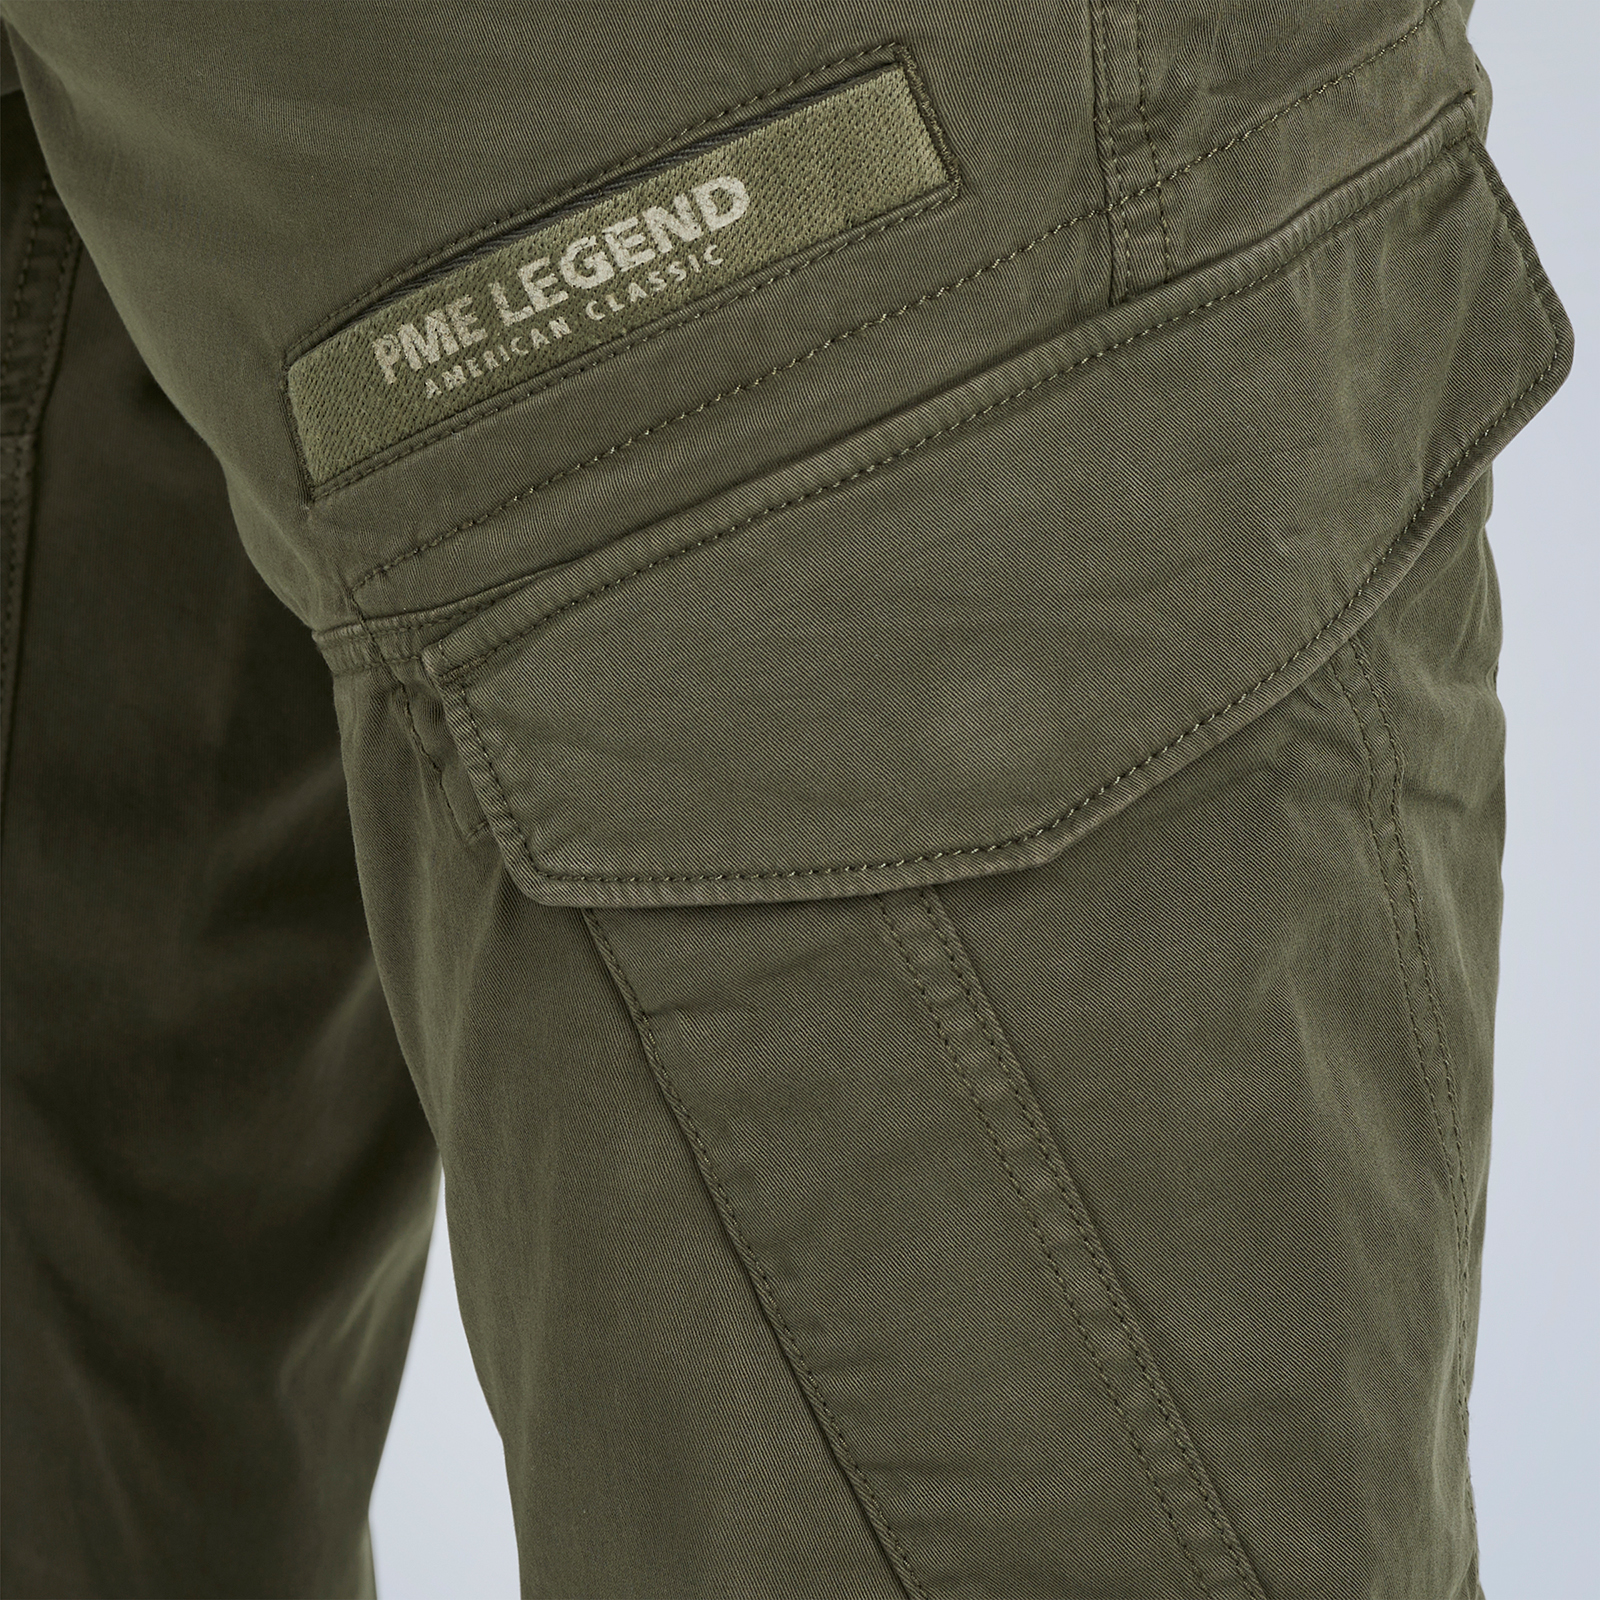 PME LEGEND | Nordrop Tapered Fit Cargohose | Free shipping and returns